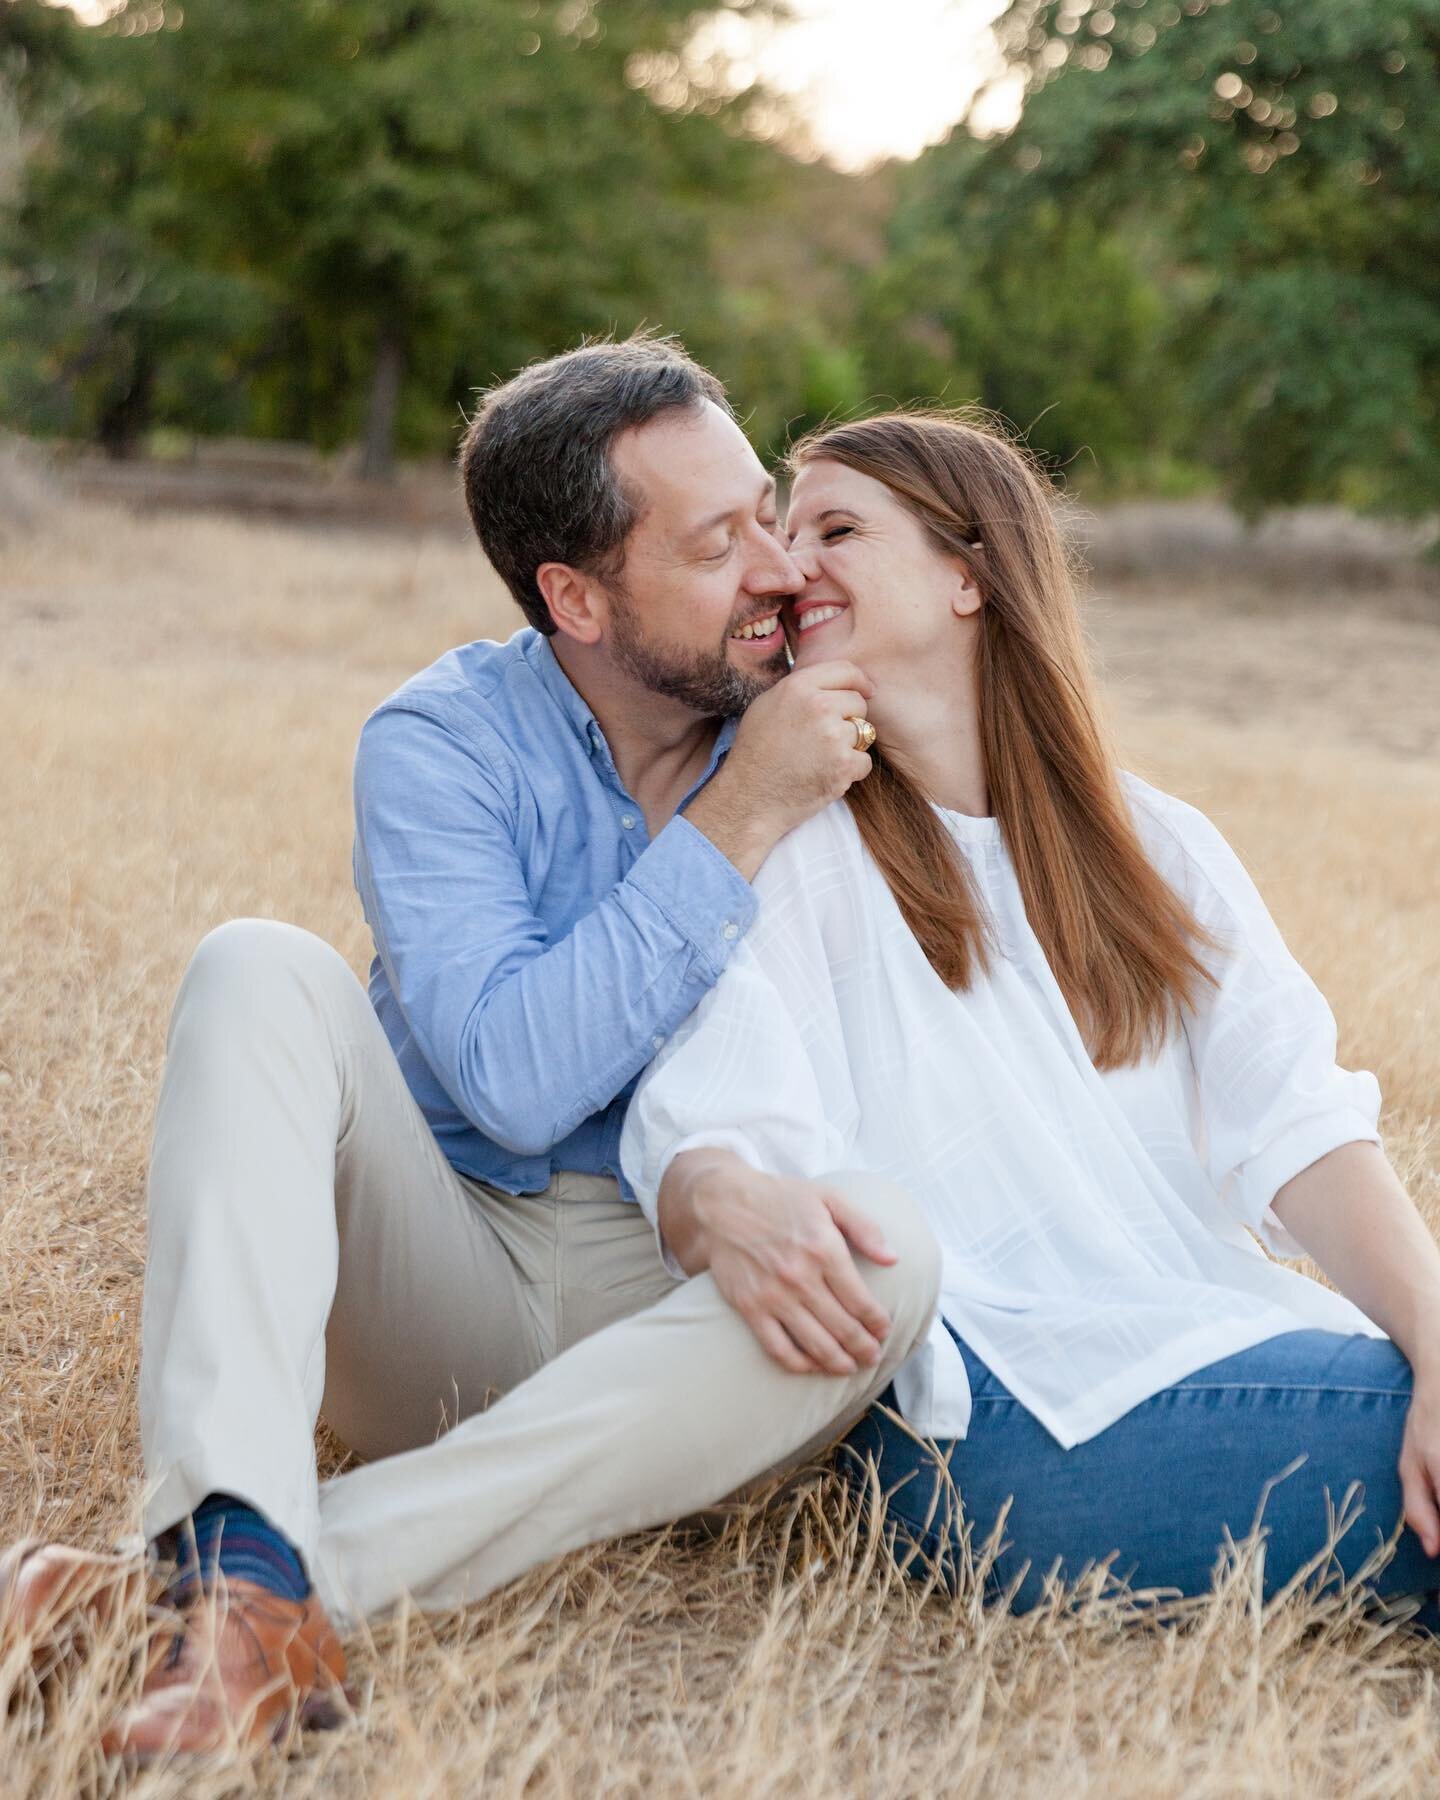 Kisses at sunset, not much sweeter. .
.
Sneak peak from Kendra and Jason&rsquo;s session tonight. More to come very soon.